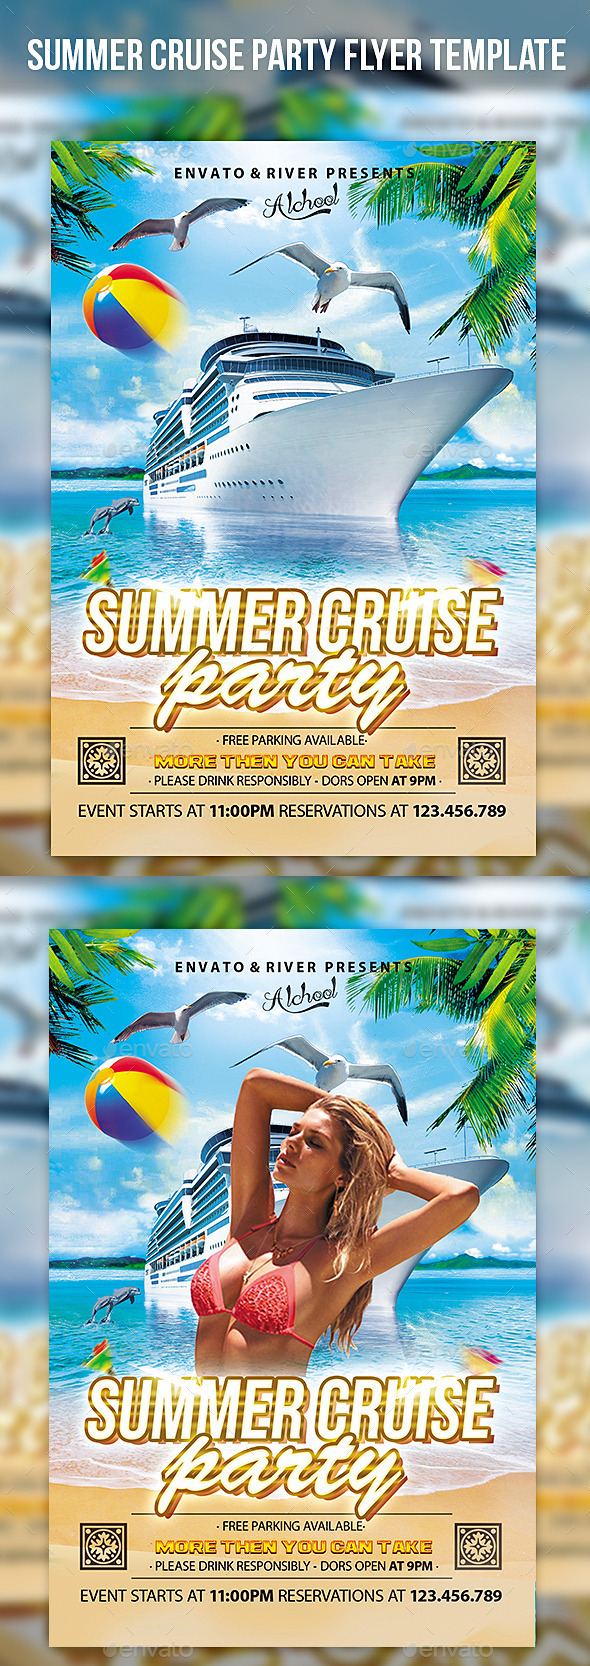 Summer Cruise Party Flyer Template Intended For Boat Cruise Flyer Template Within Boat Cruise Flyer Template